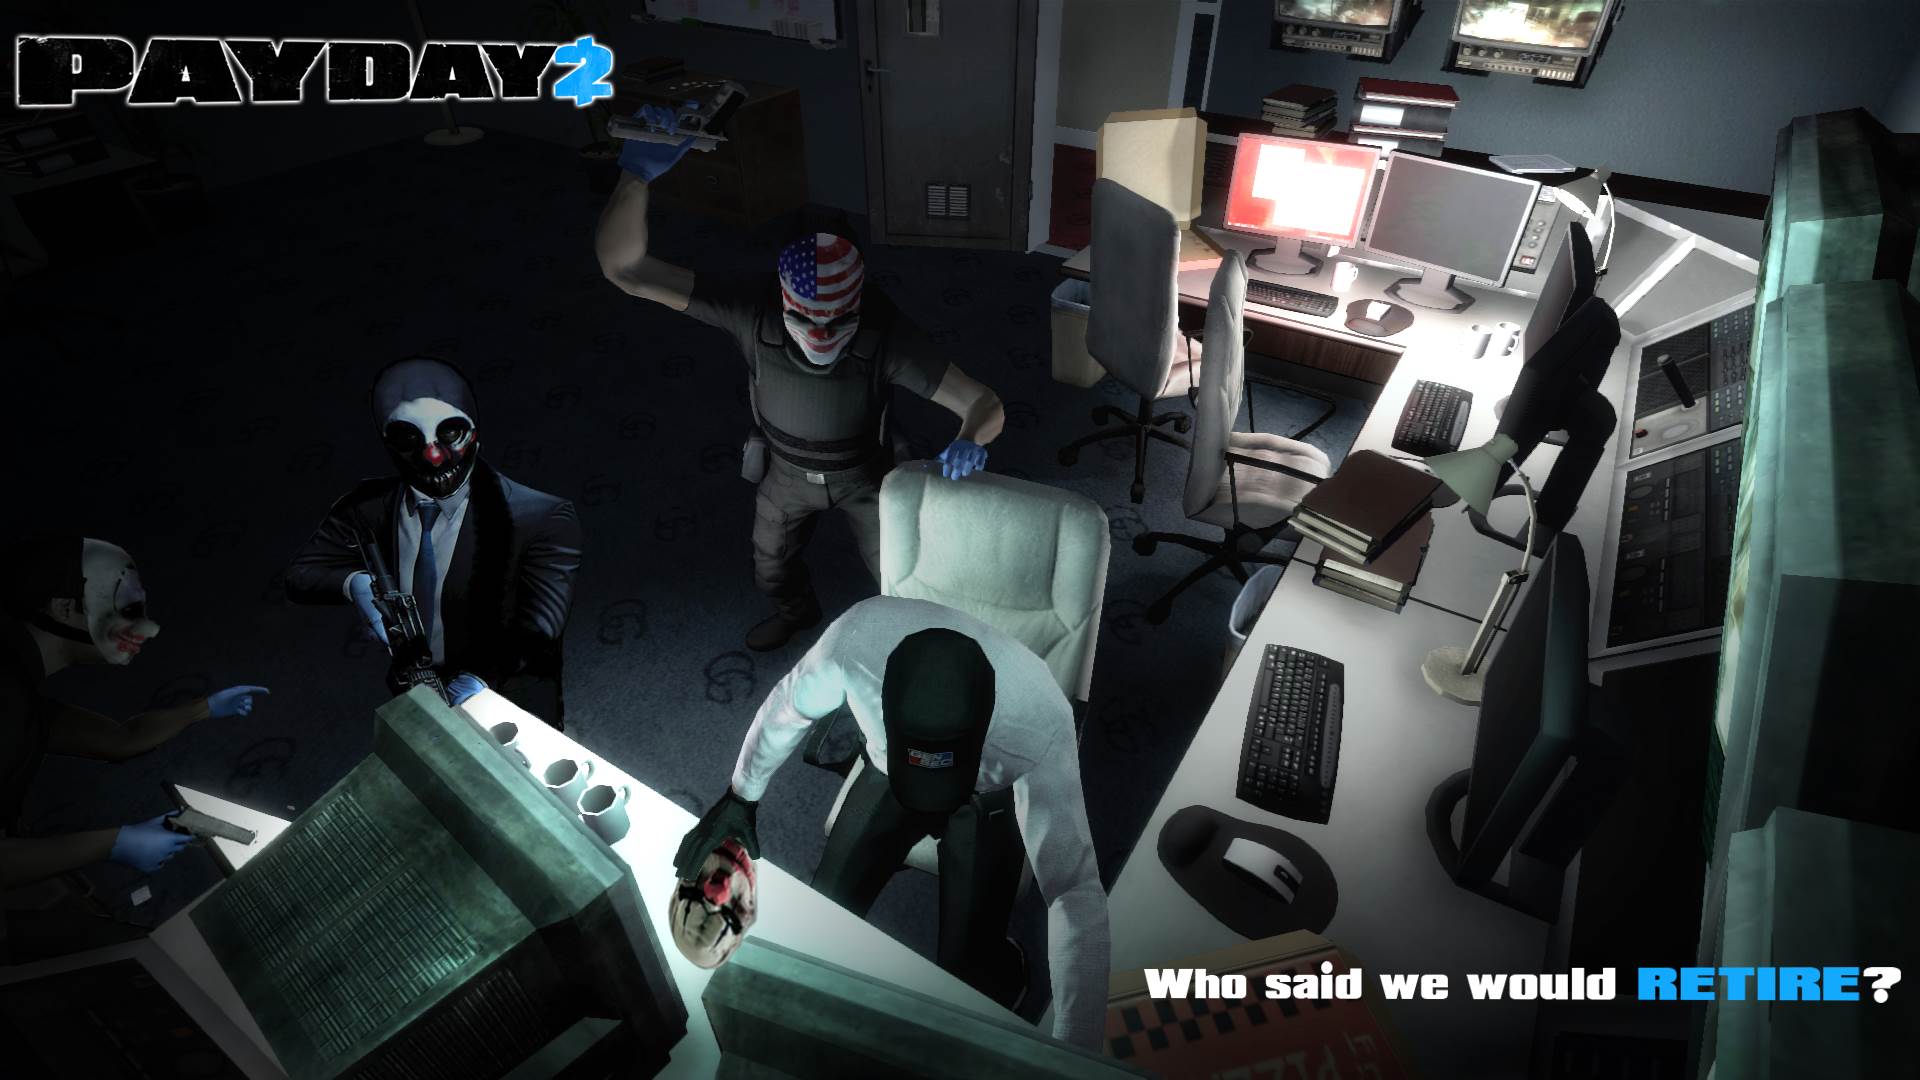 Payday 2 Wallpaper in 1080P HD « GamingBolt.com: Video Game News